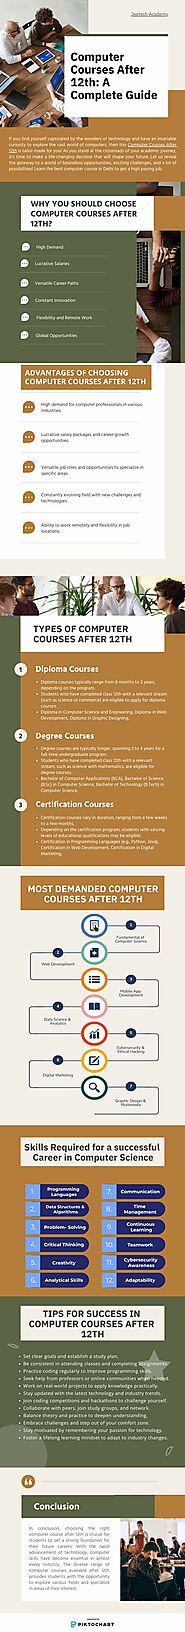 Computer Courses after 12th | Piktochart Visual Editor